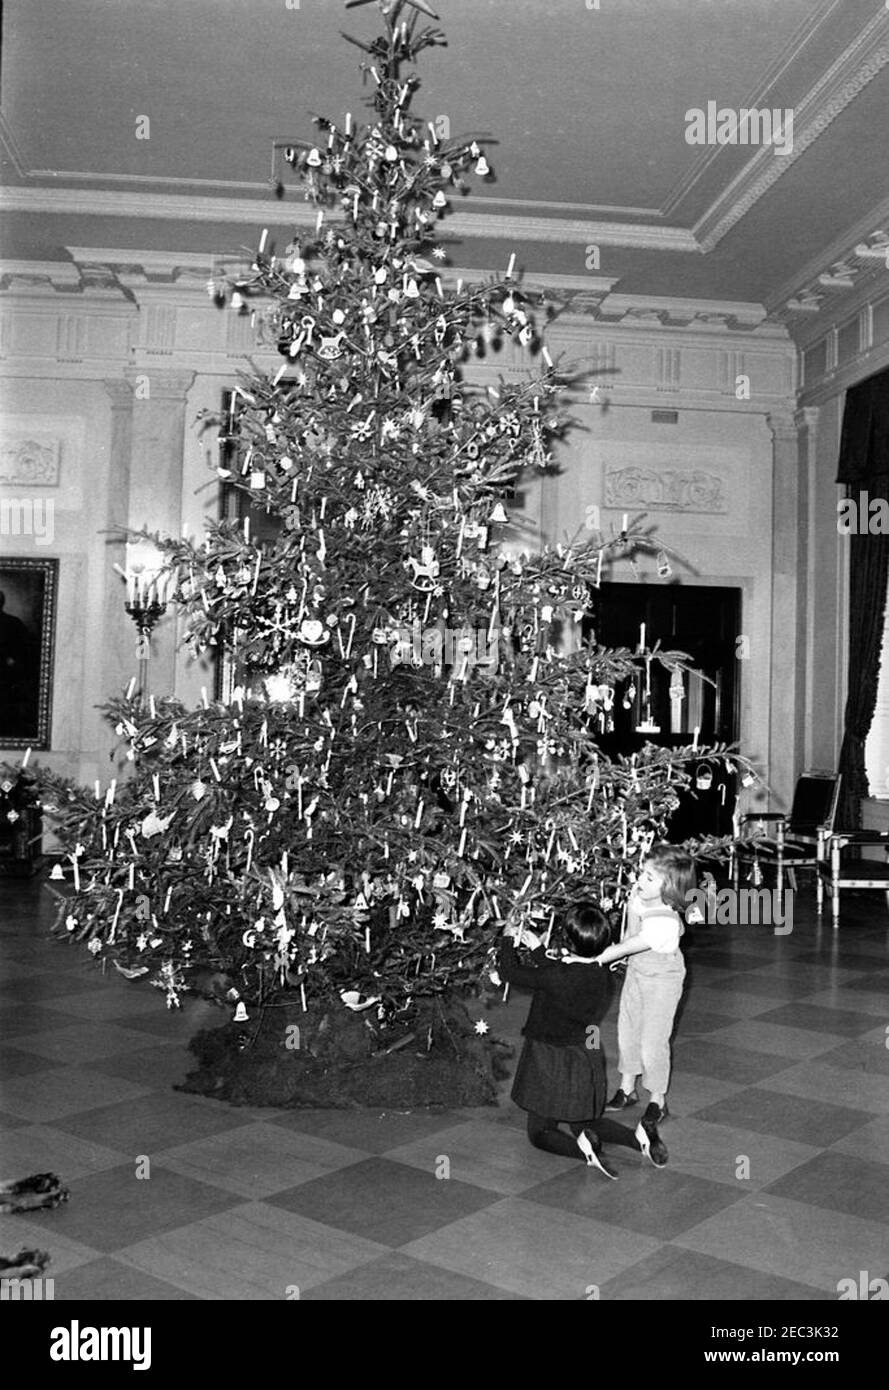 Caroline Kennedy (CBK) with a friend. Caroline Kennedy (right) and an unidentified friend (kneeling) put candy canes on the lower branches of the Christmas tree in the North Entrance Hall of the White House, Washington, D.C. Stock Photo